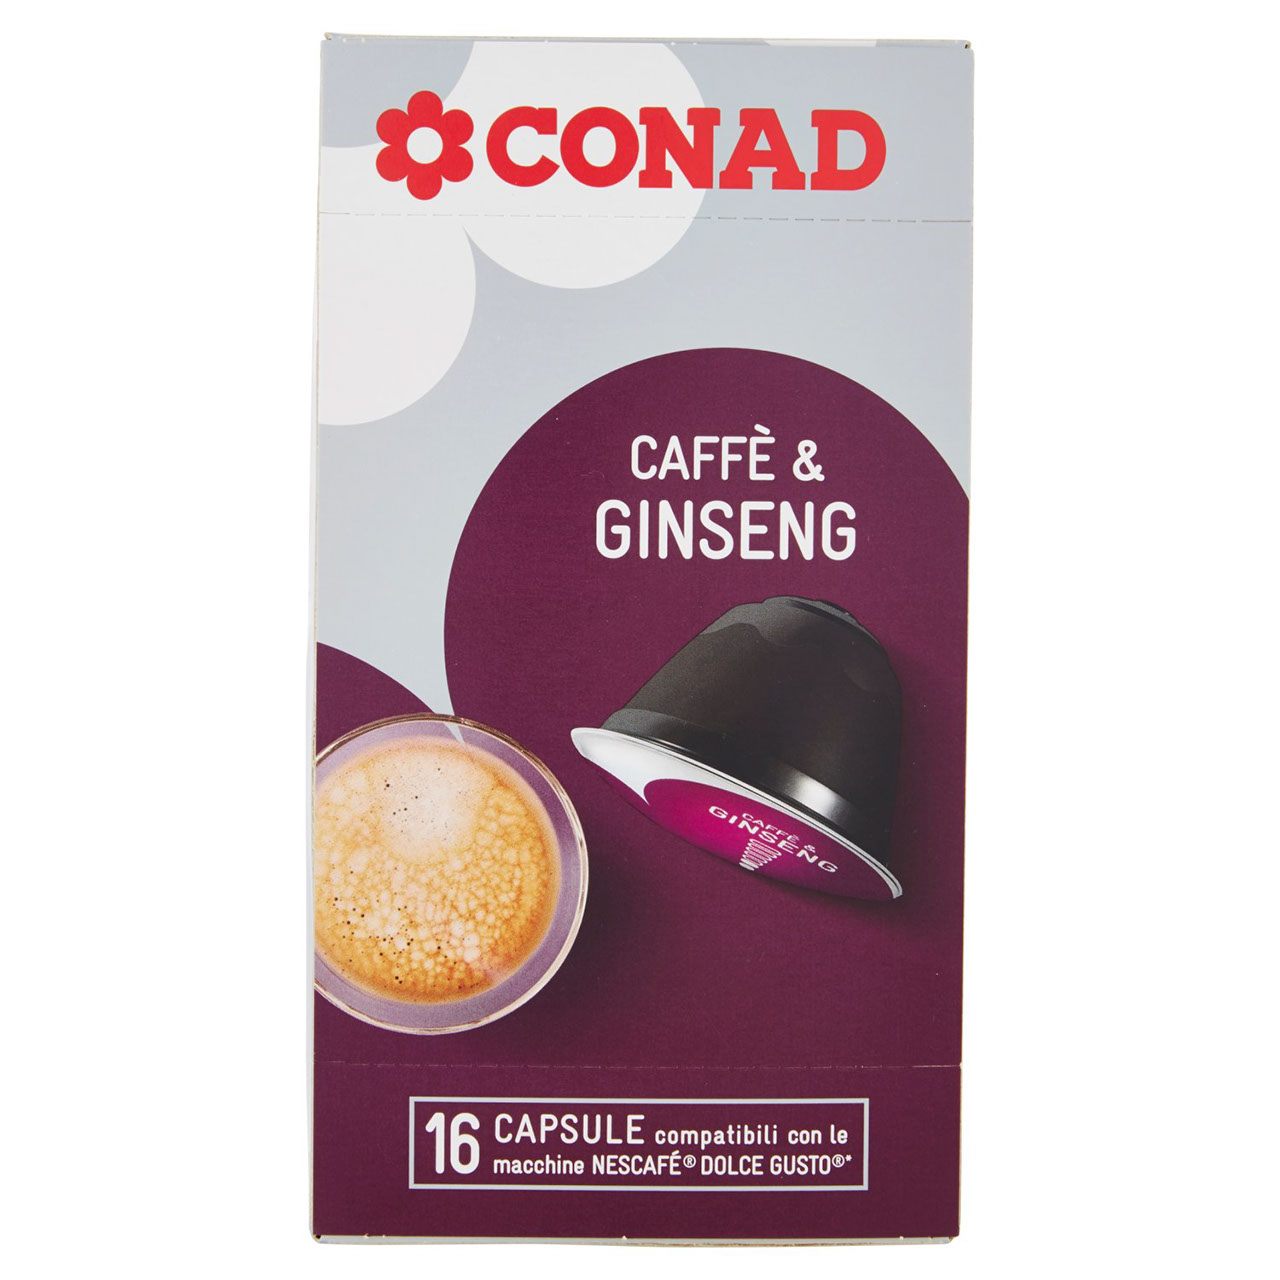 Caffè & Ginseng 16 Capsule Dolce Gusto Conad